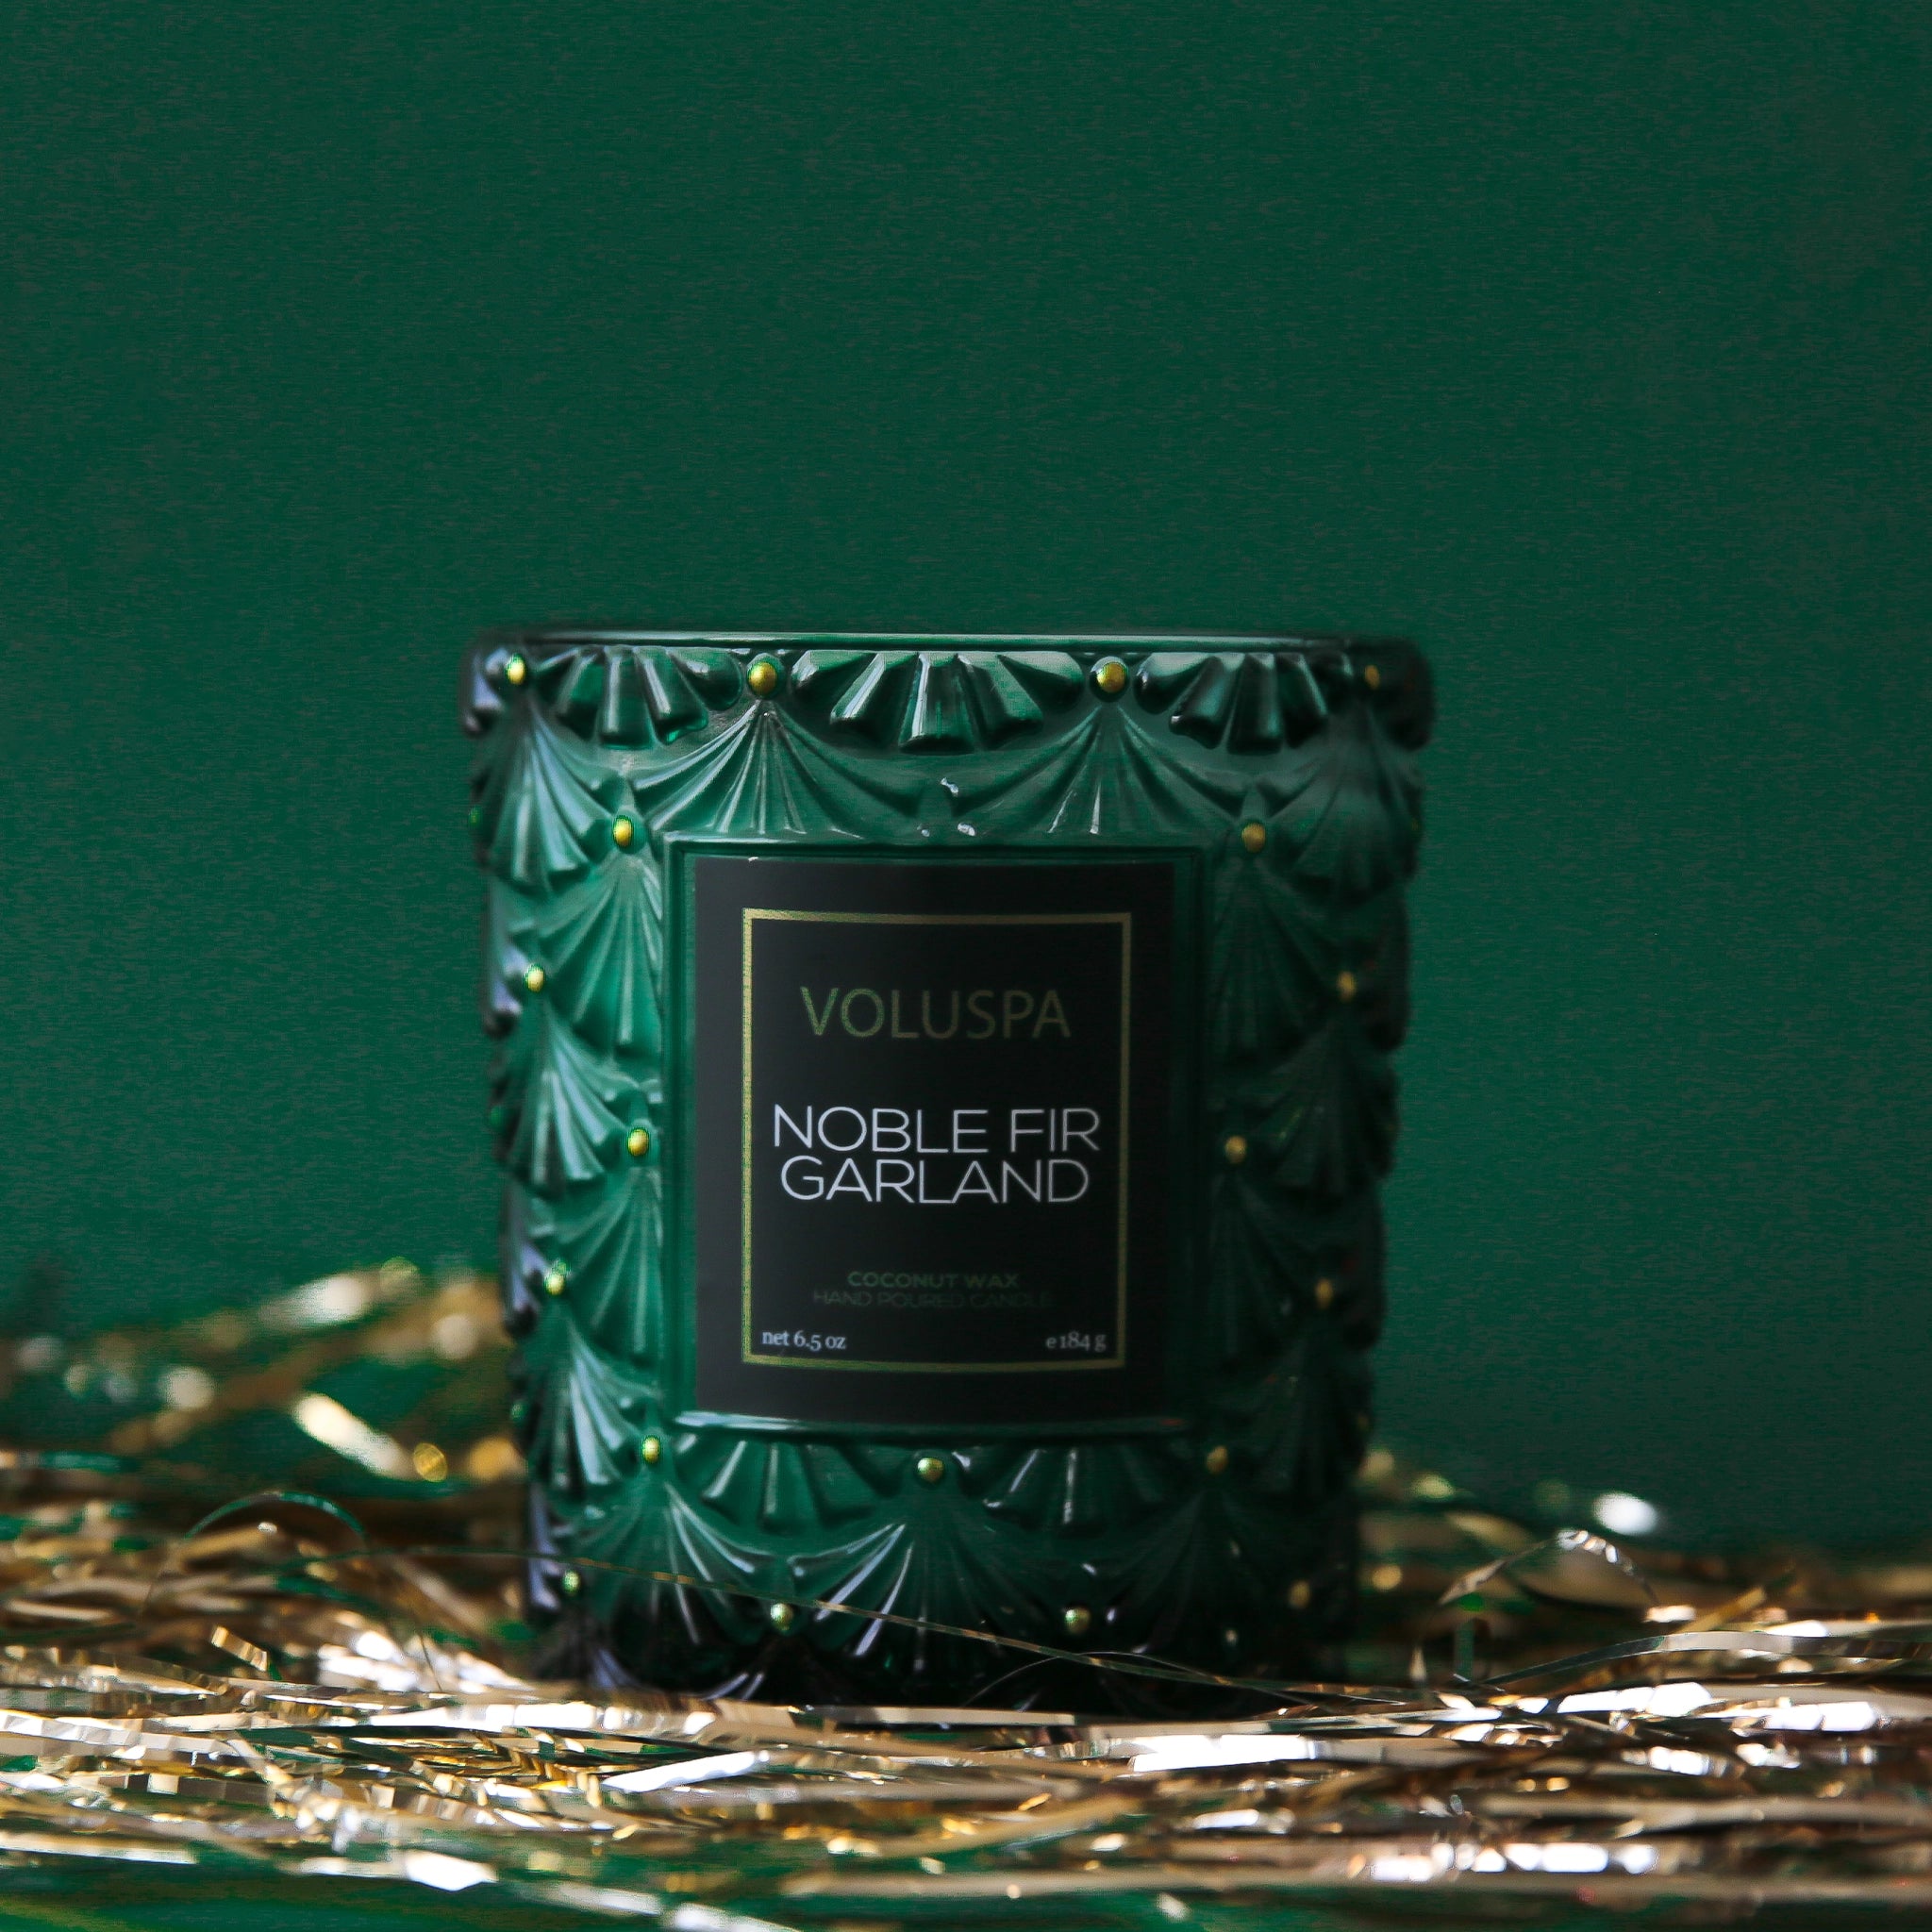 On a dark green background is a green glass candle with a label that reads, "Noble Fir Garland".